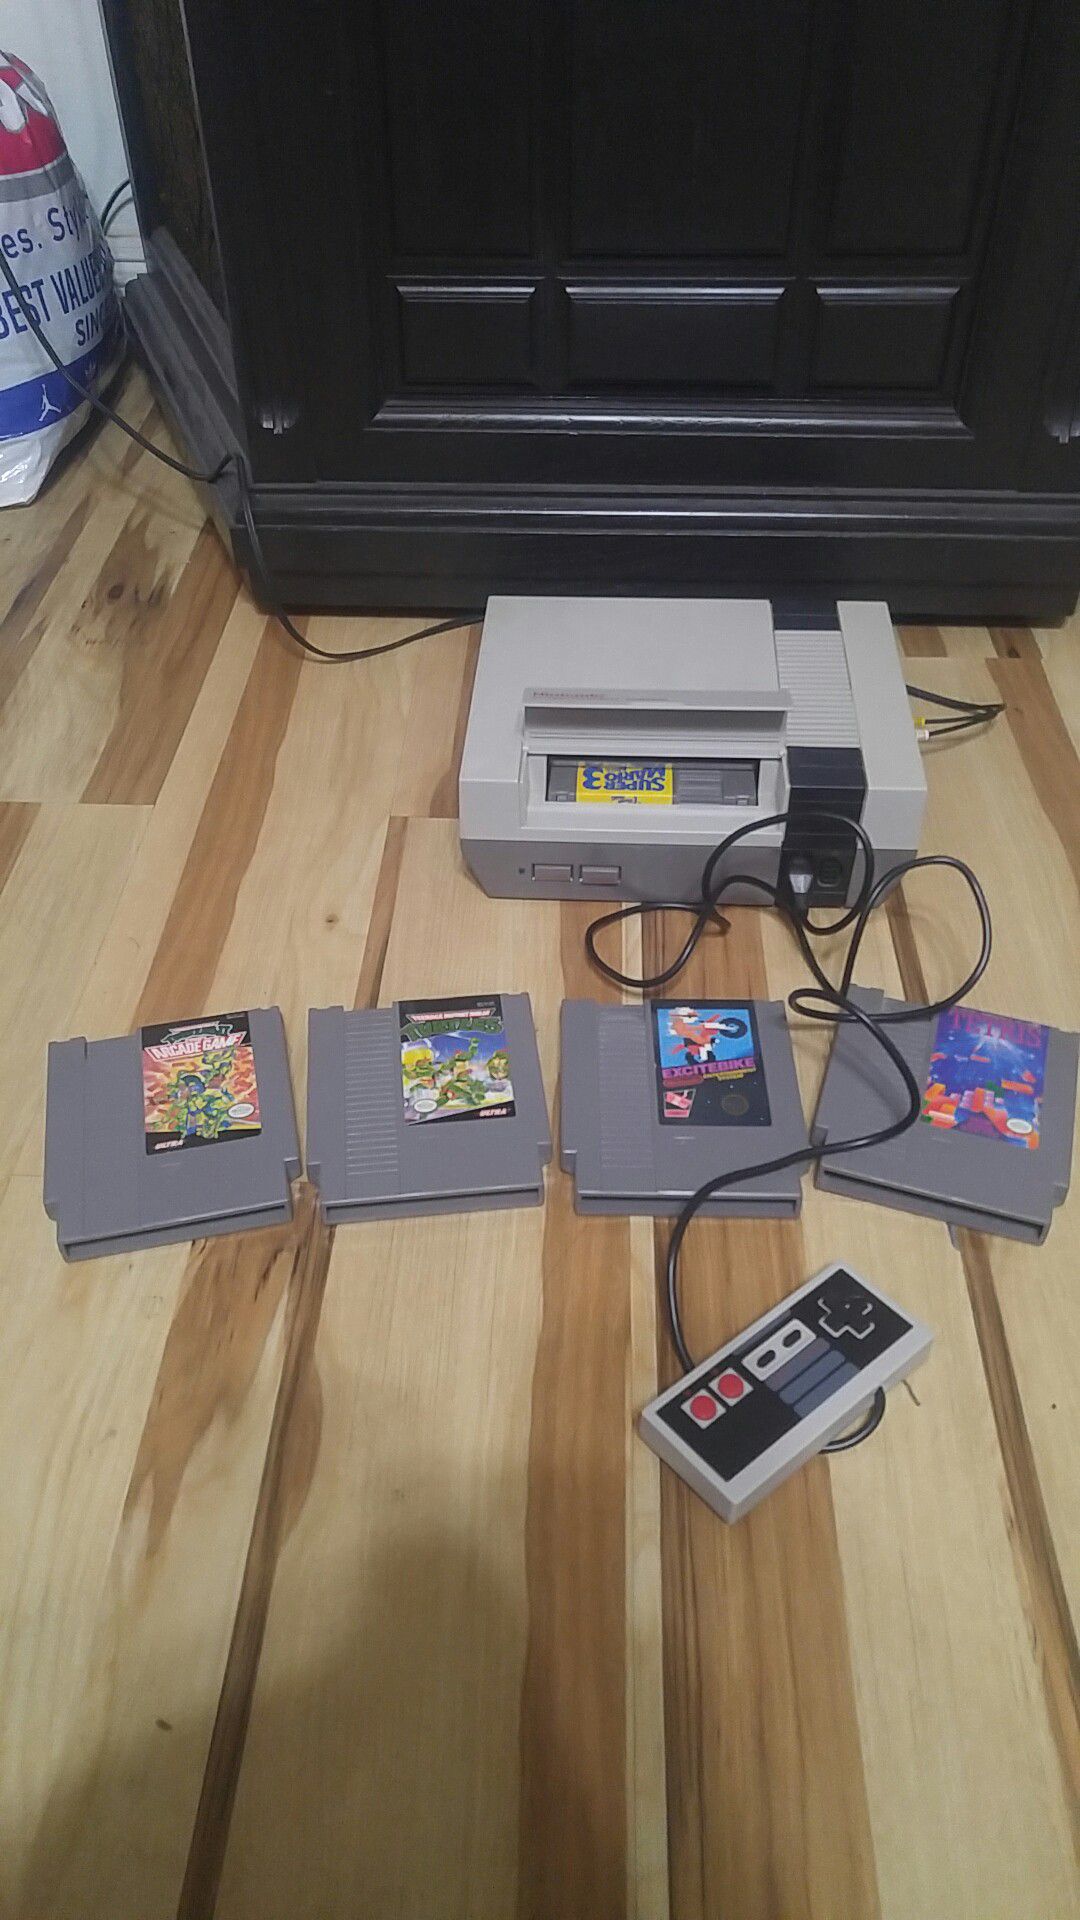 Nes with5 games